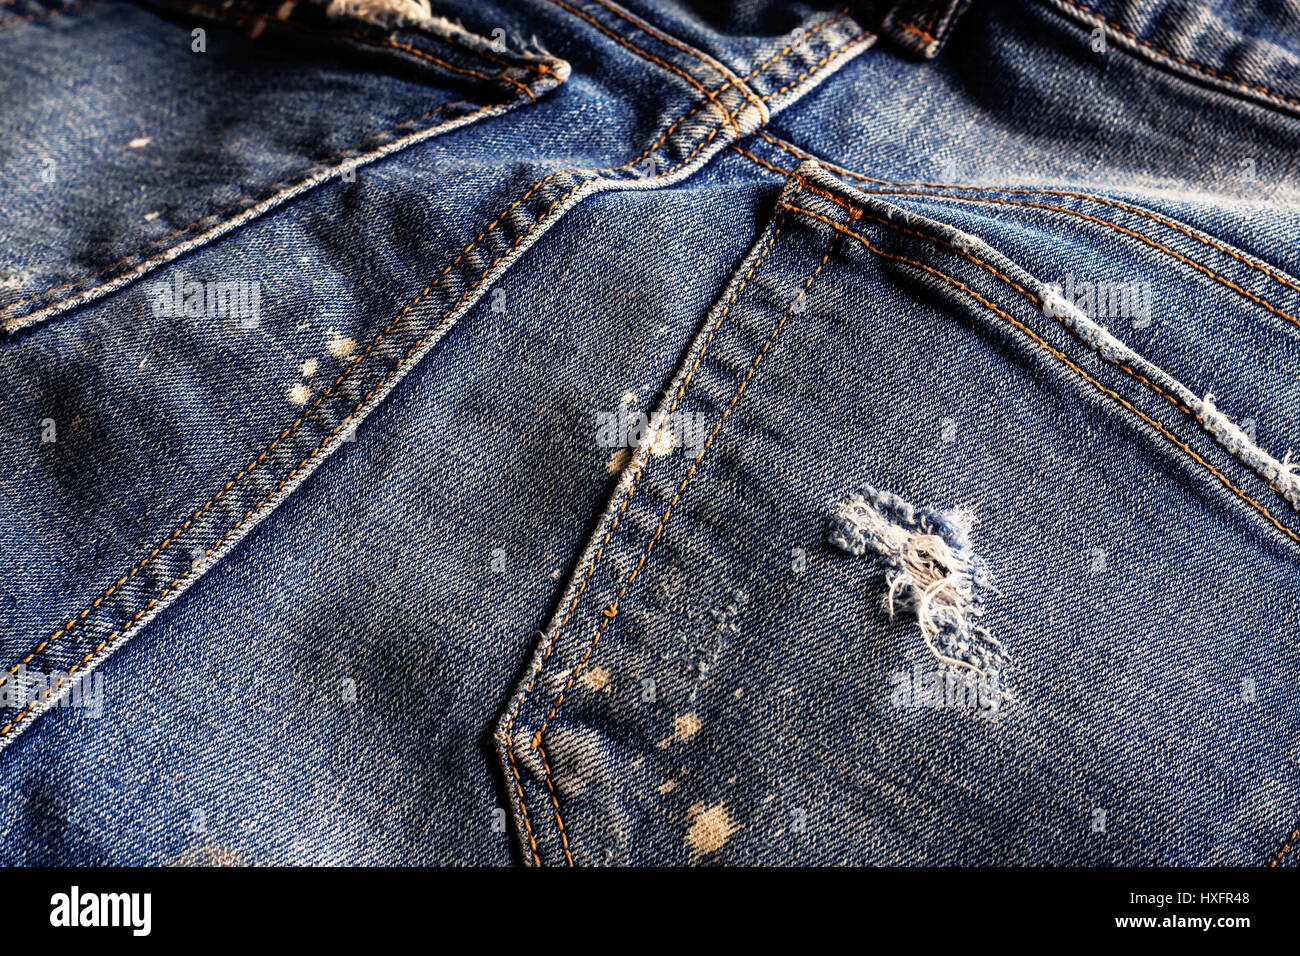 The surface of old jeans and a tear on the fabric Stock Photo - Alamy